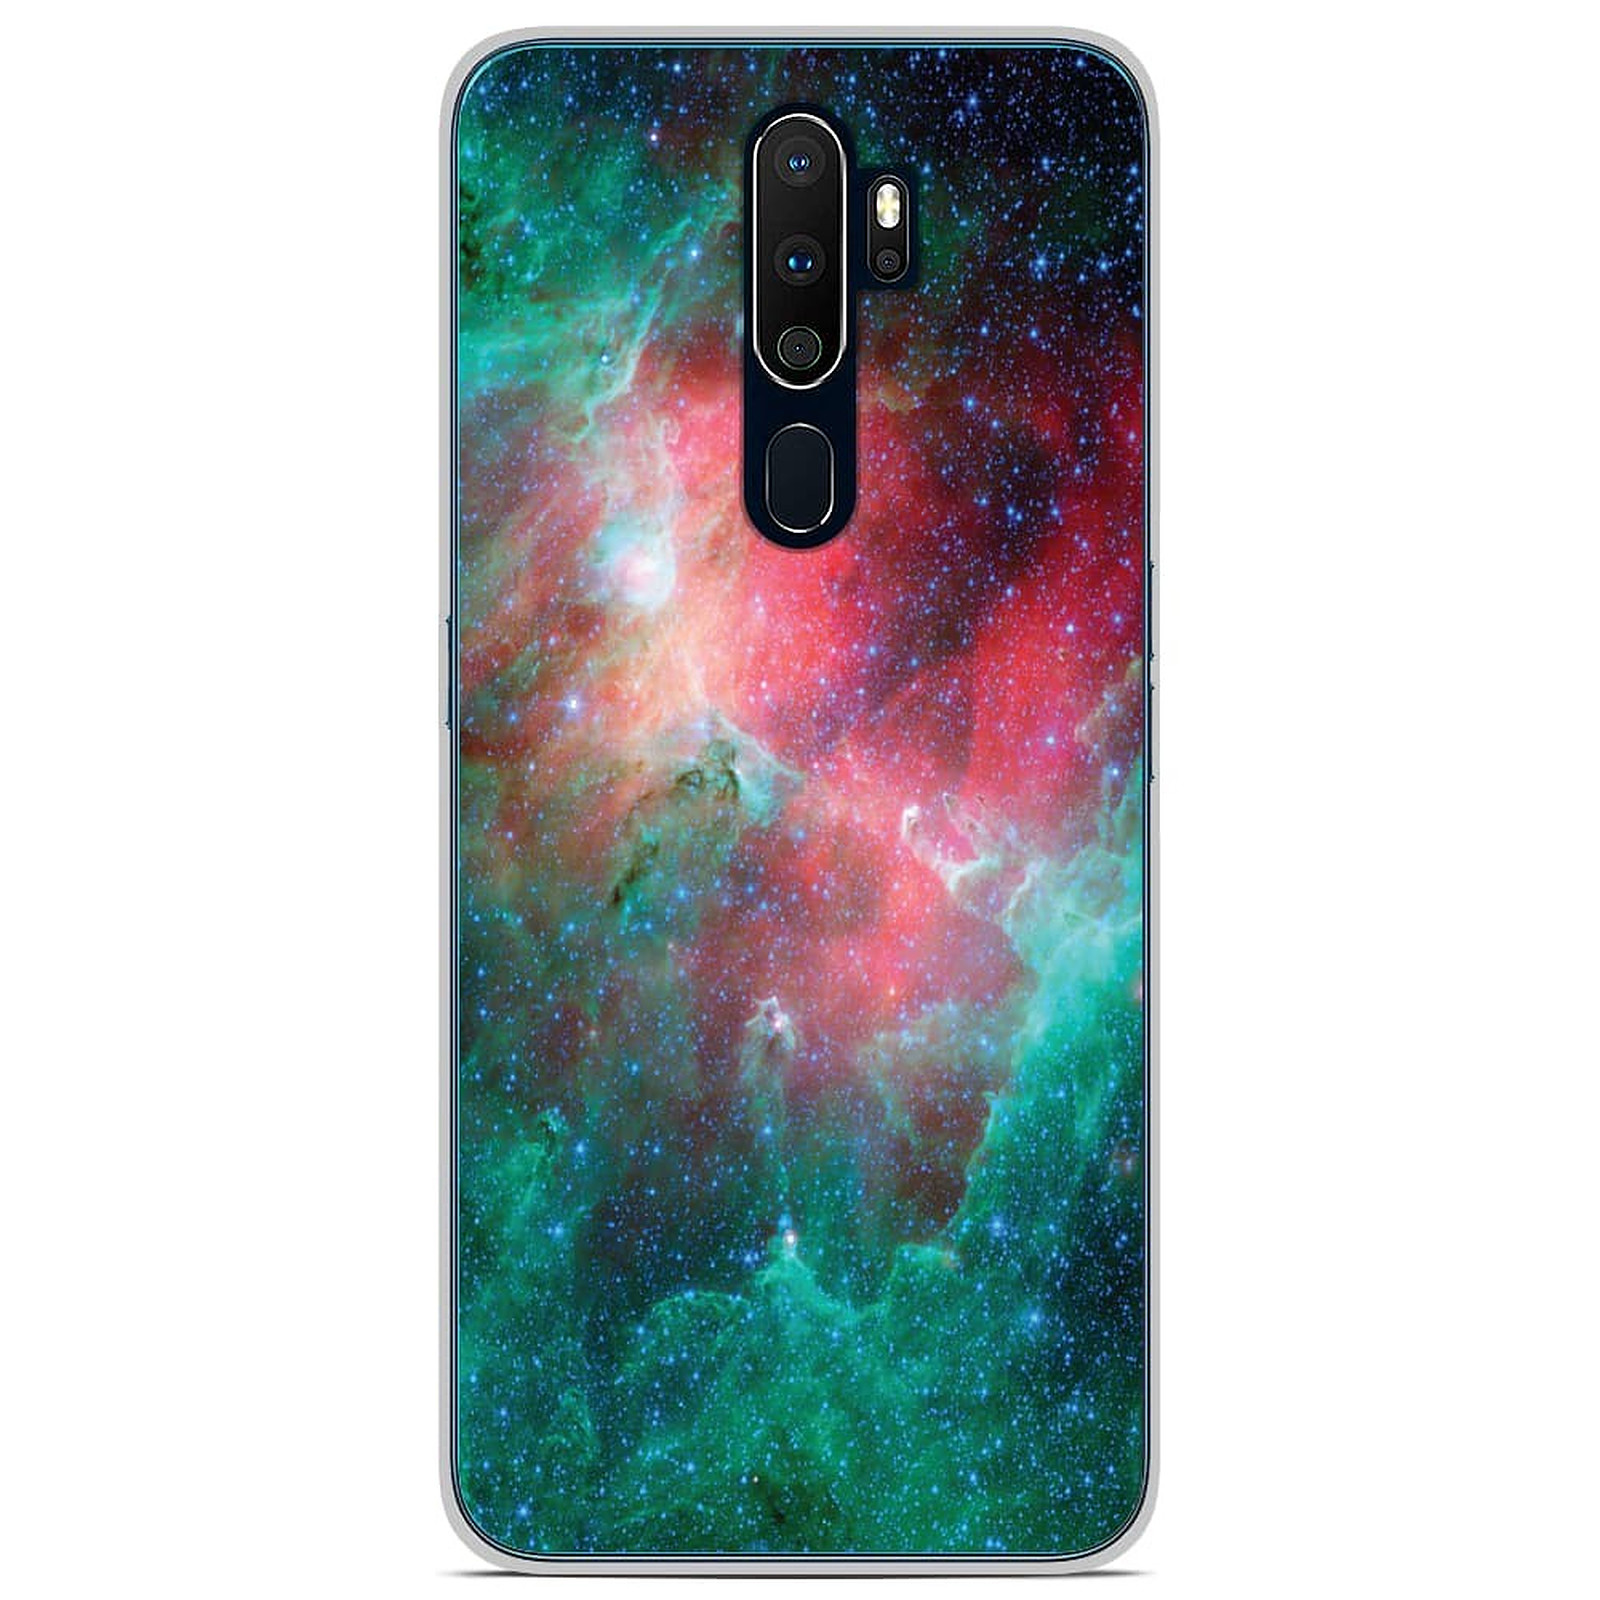 1001 Coques Coque silicone gel Oppo A9 2020 motif Nebuleuse - Coque telephone 1001Coques